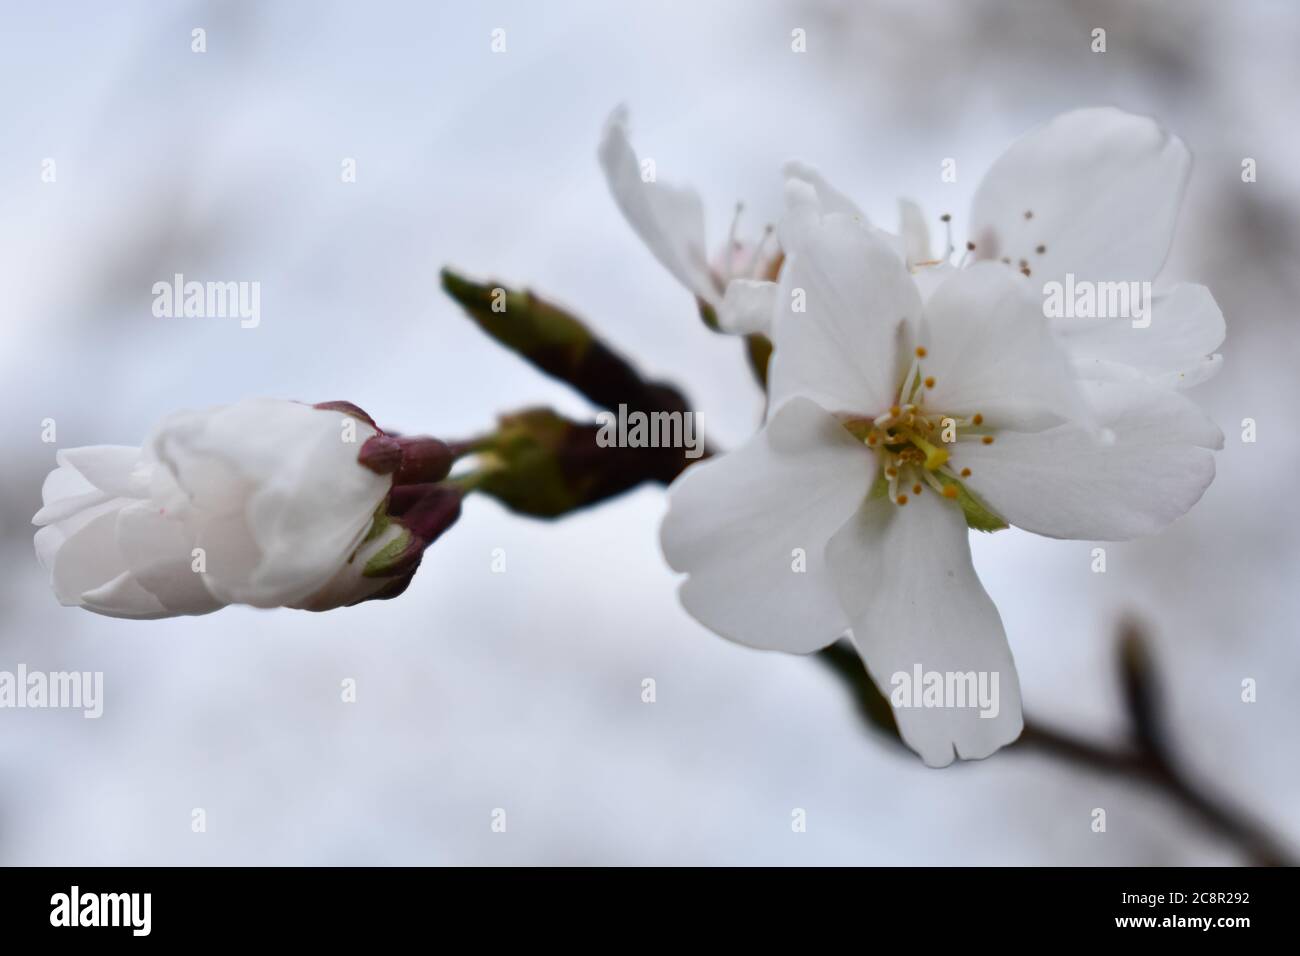 Close up view of white flowers of a cherry tree Stock Photo